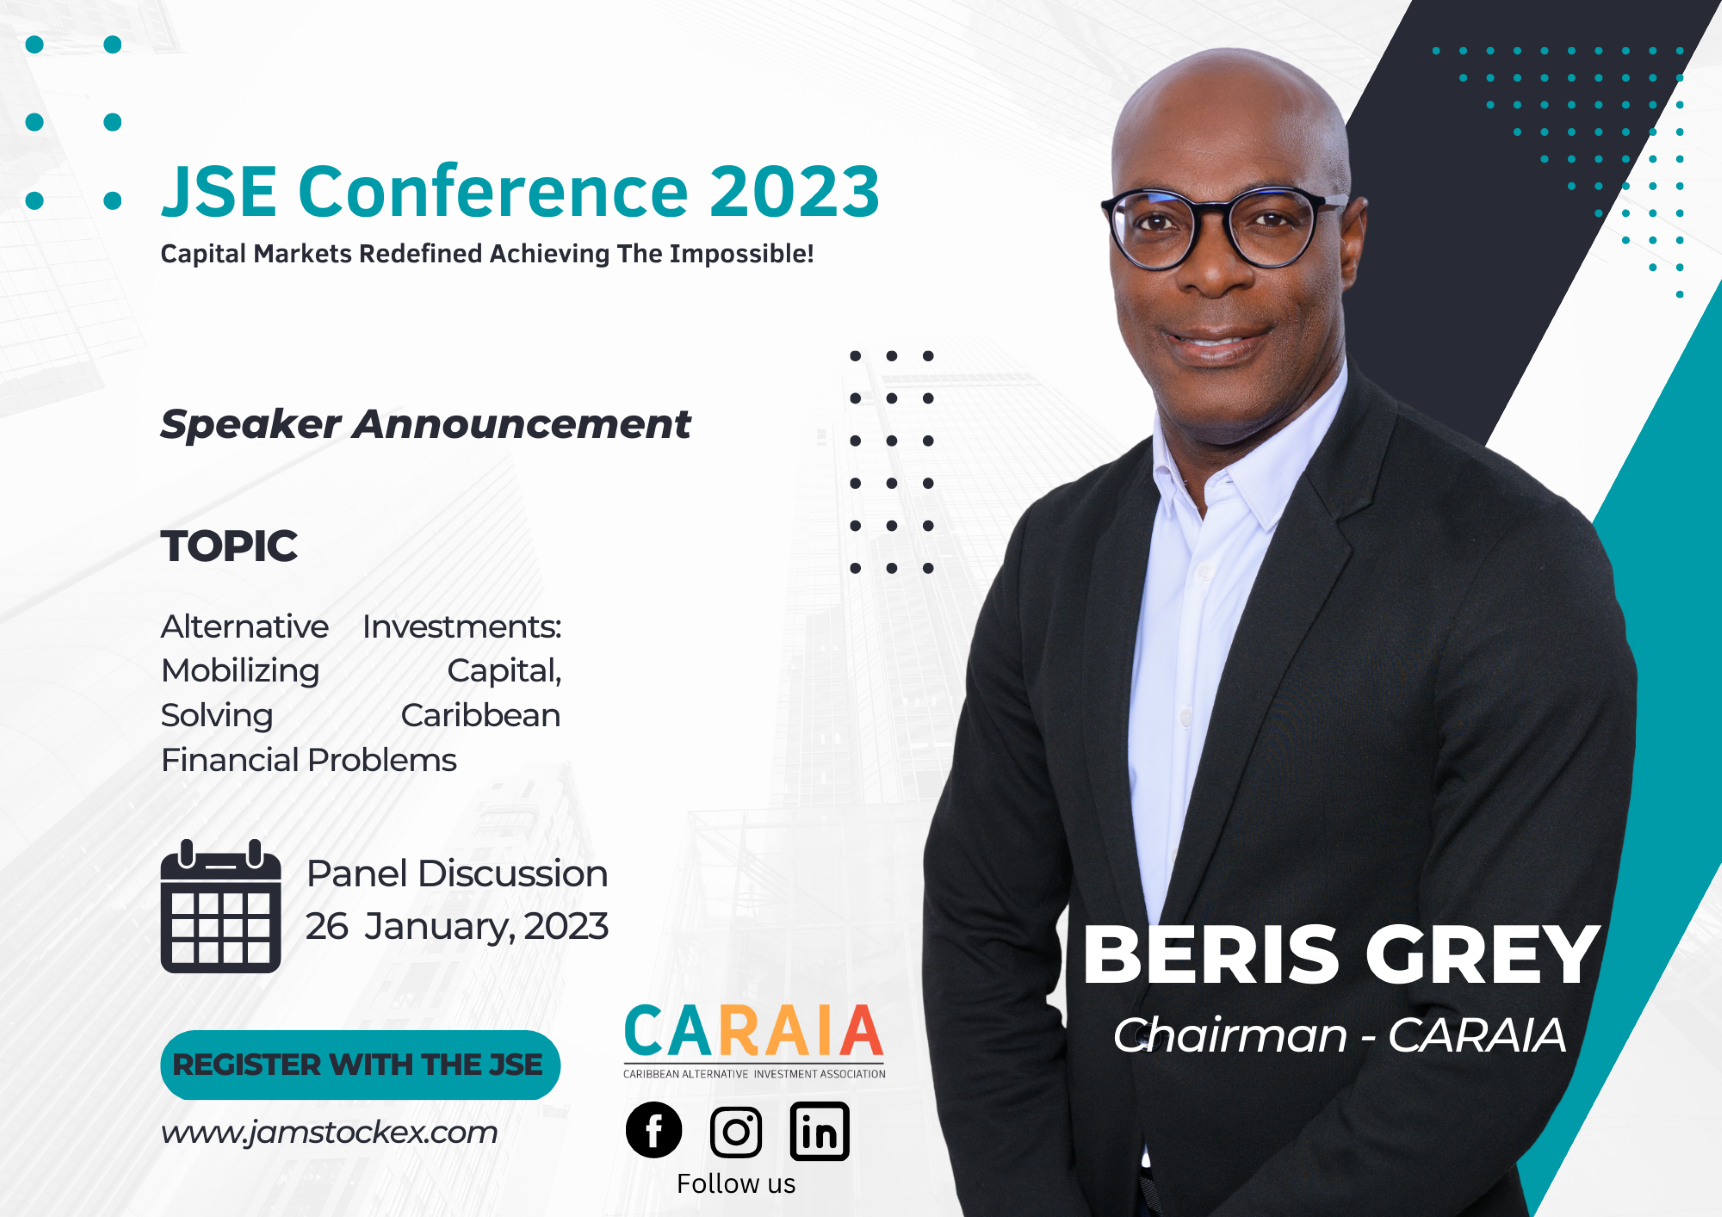 CARAIA will be at the JSE Conference - Jan 24 to 26, 2023